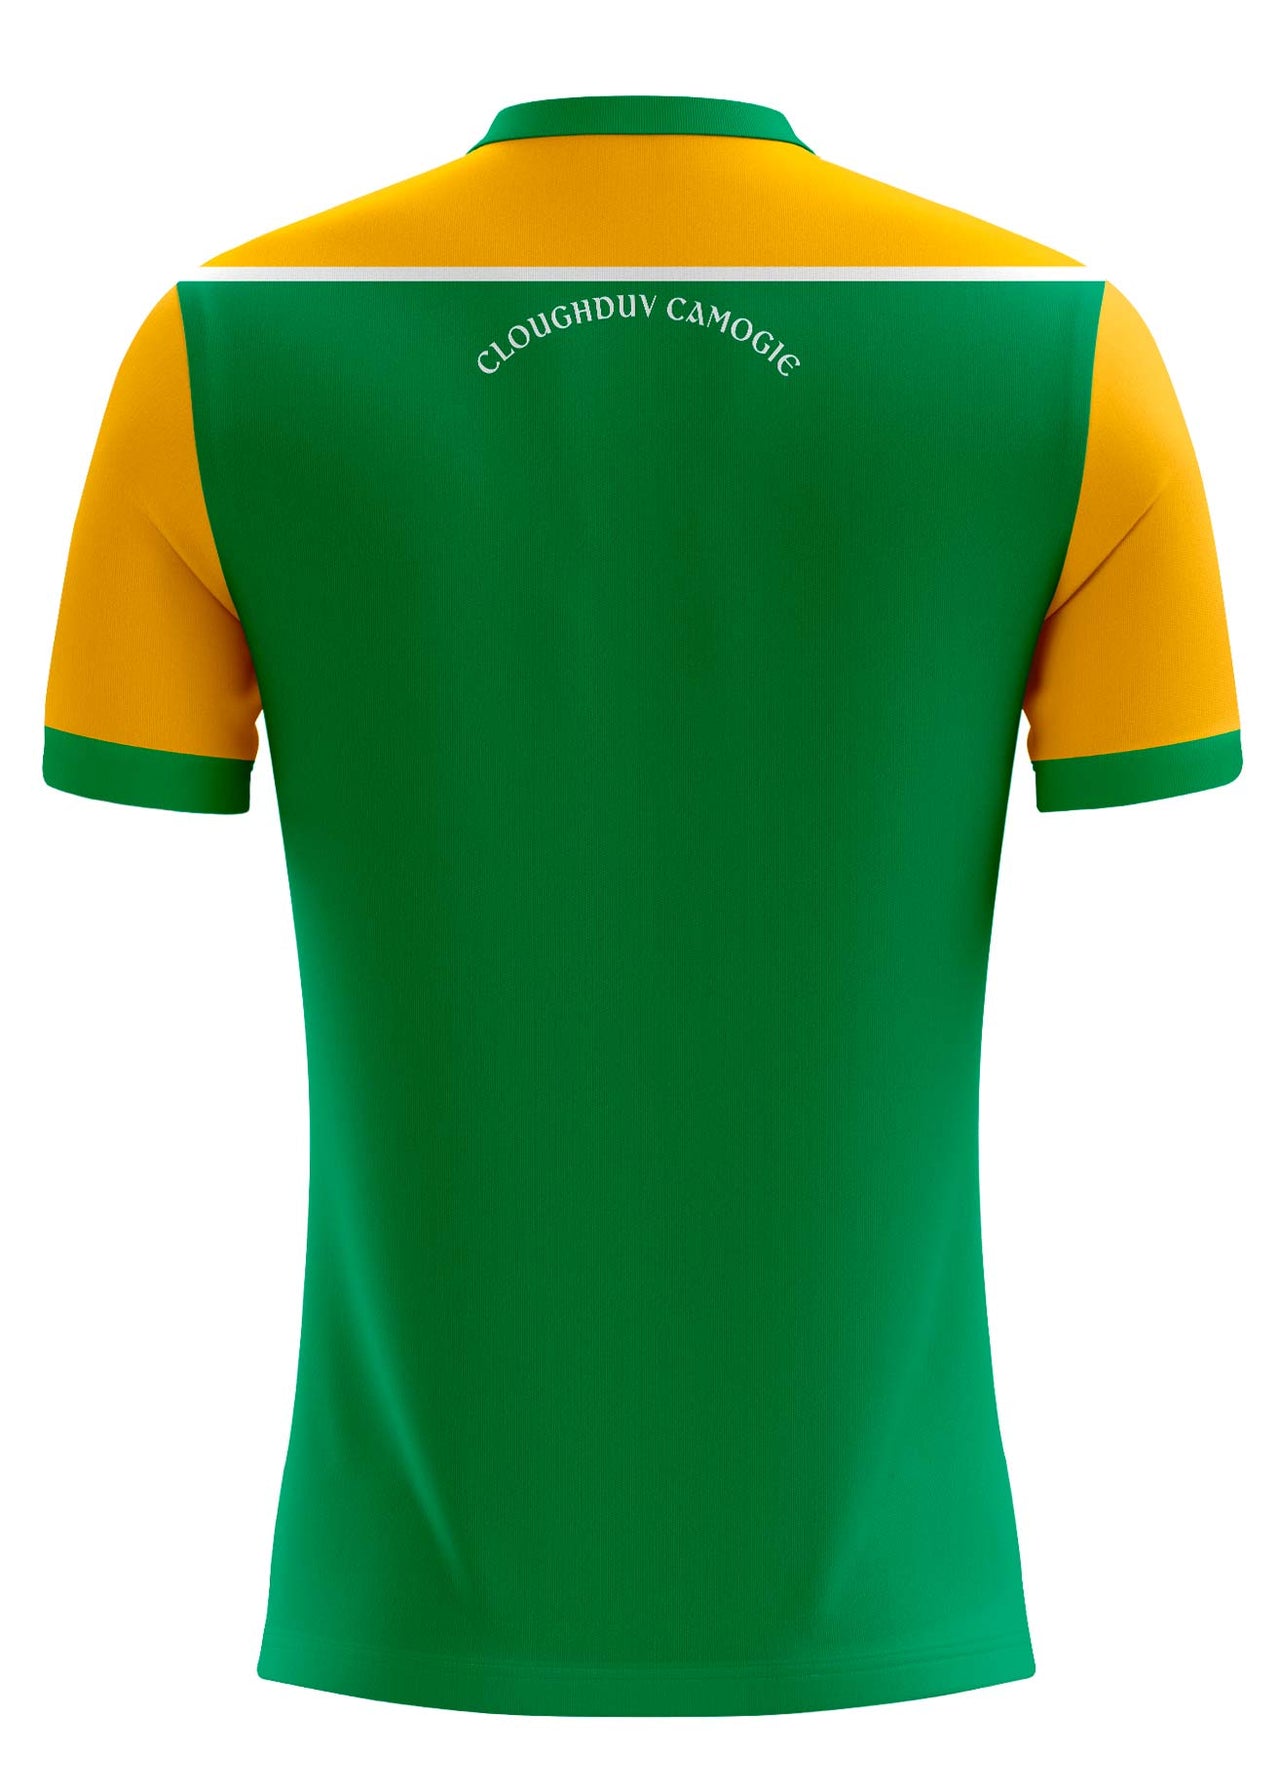 Cloughduv Camogie Home Jersey Kids